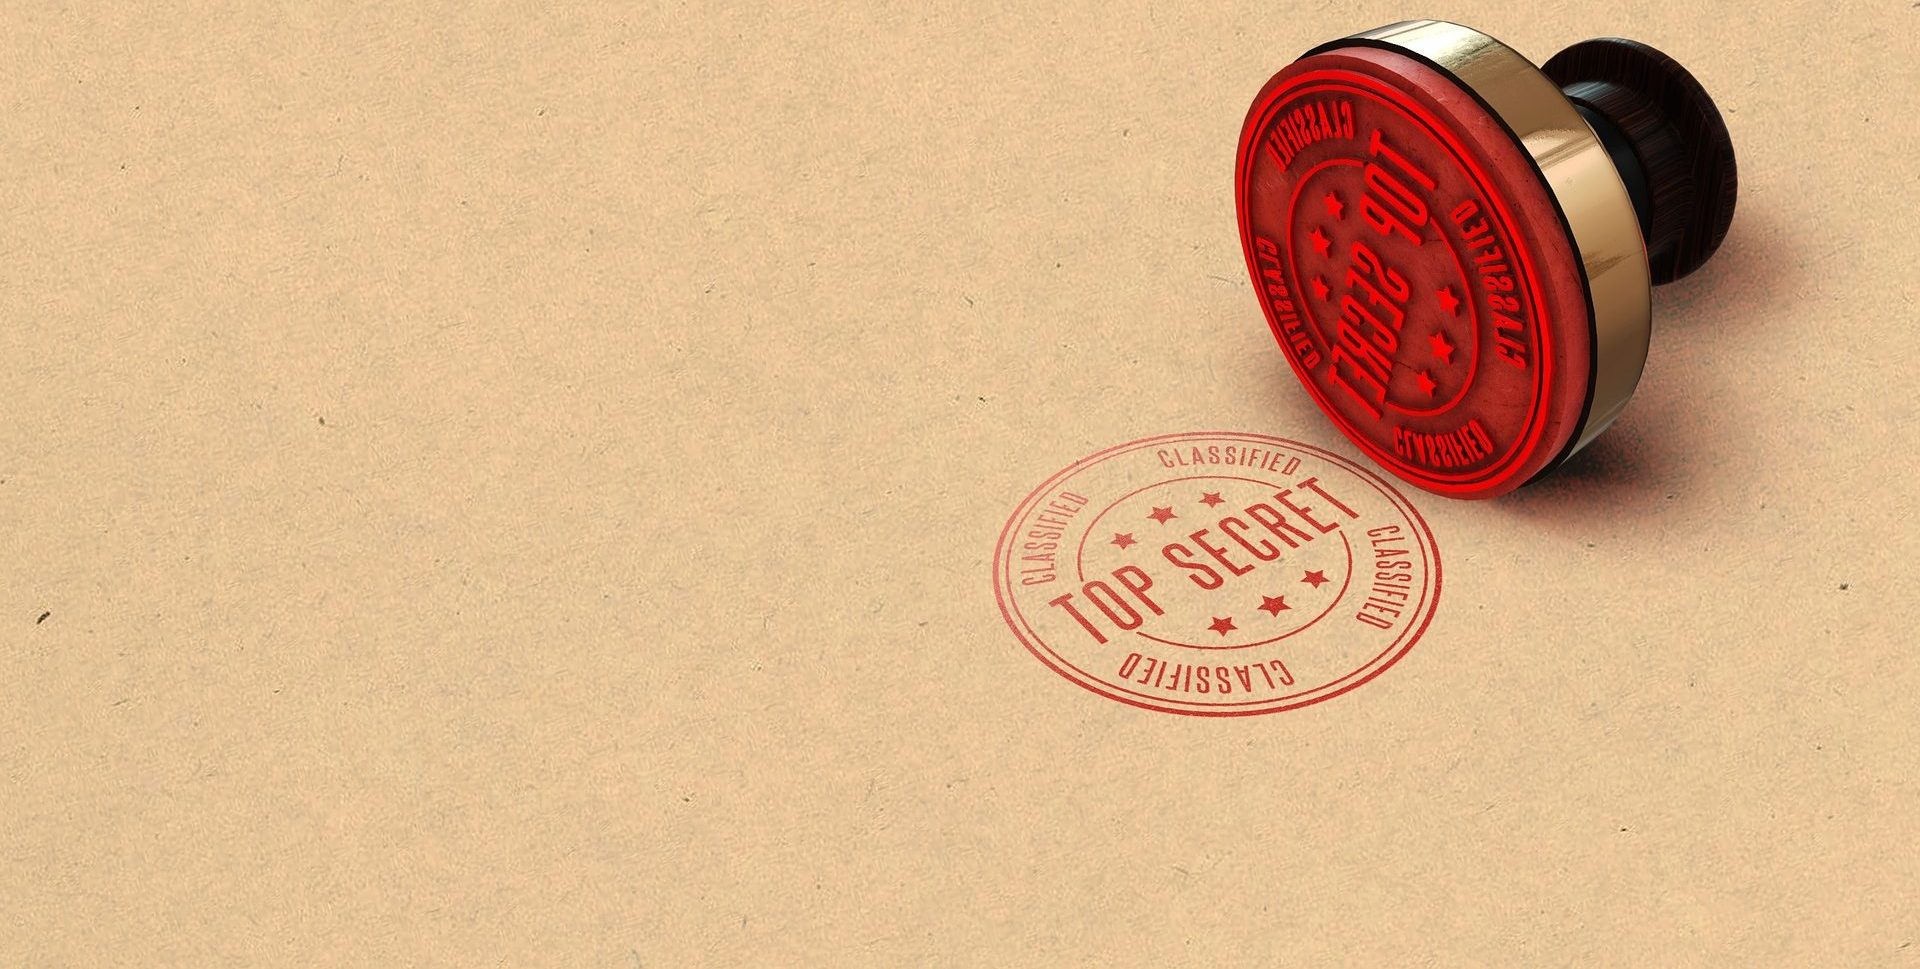 A top secret stamp alludes to the importance of loyalty program privacy.